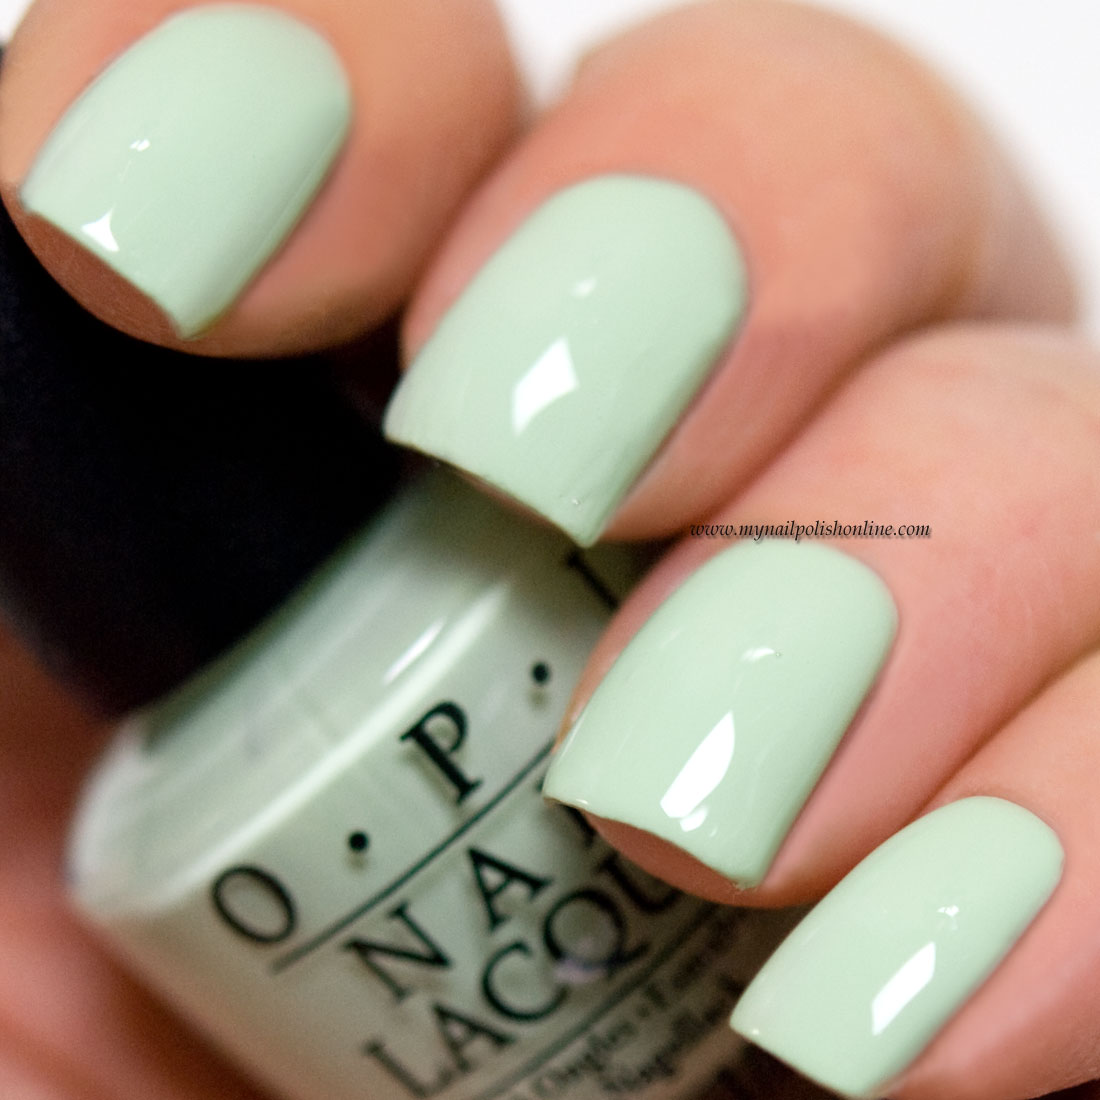 OPI - This Cost Me a Mint